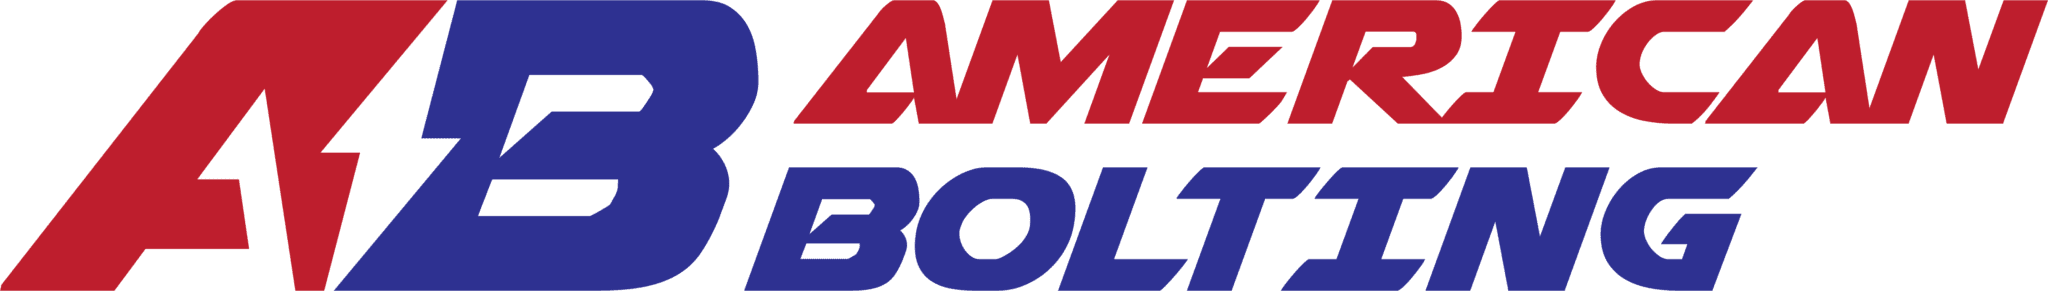 Industrial Bolting Solutions | American Bolting